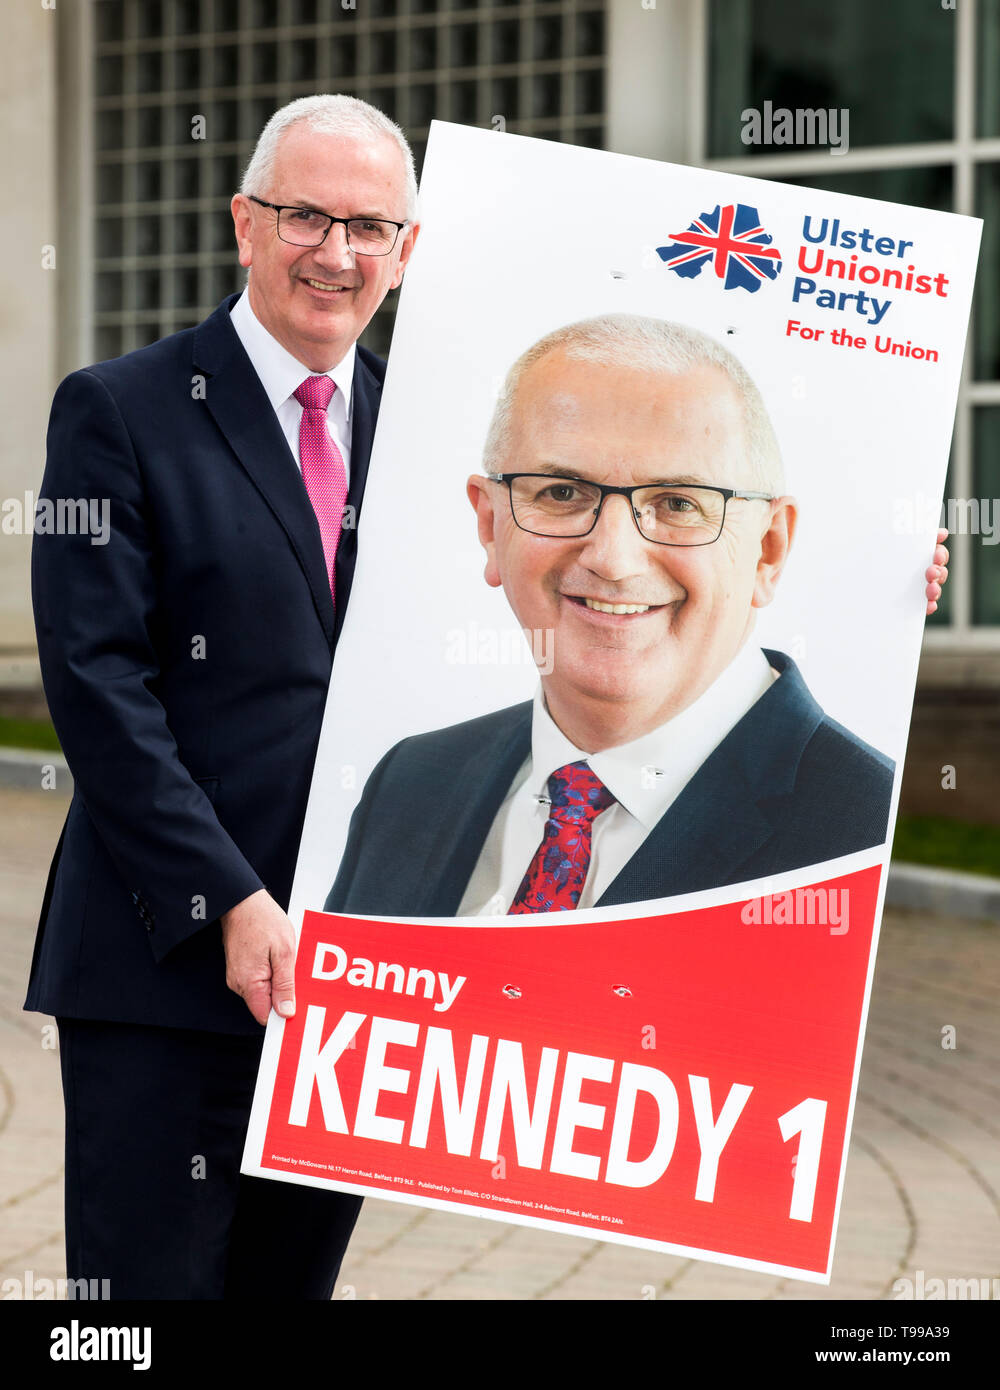 Danny Kennedy after launching the Ulster Unionist Party manifesto for the 2019 European election at the Stormont Hotel in Belfast. Stock Photo